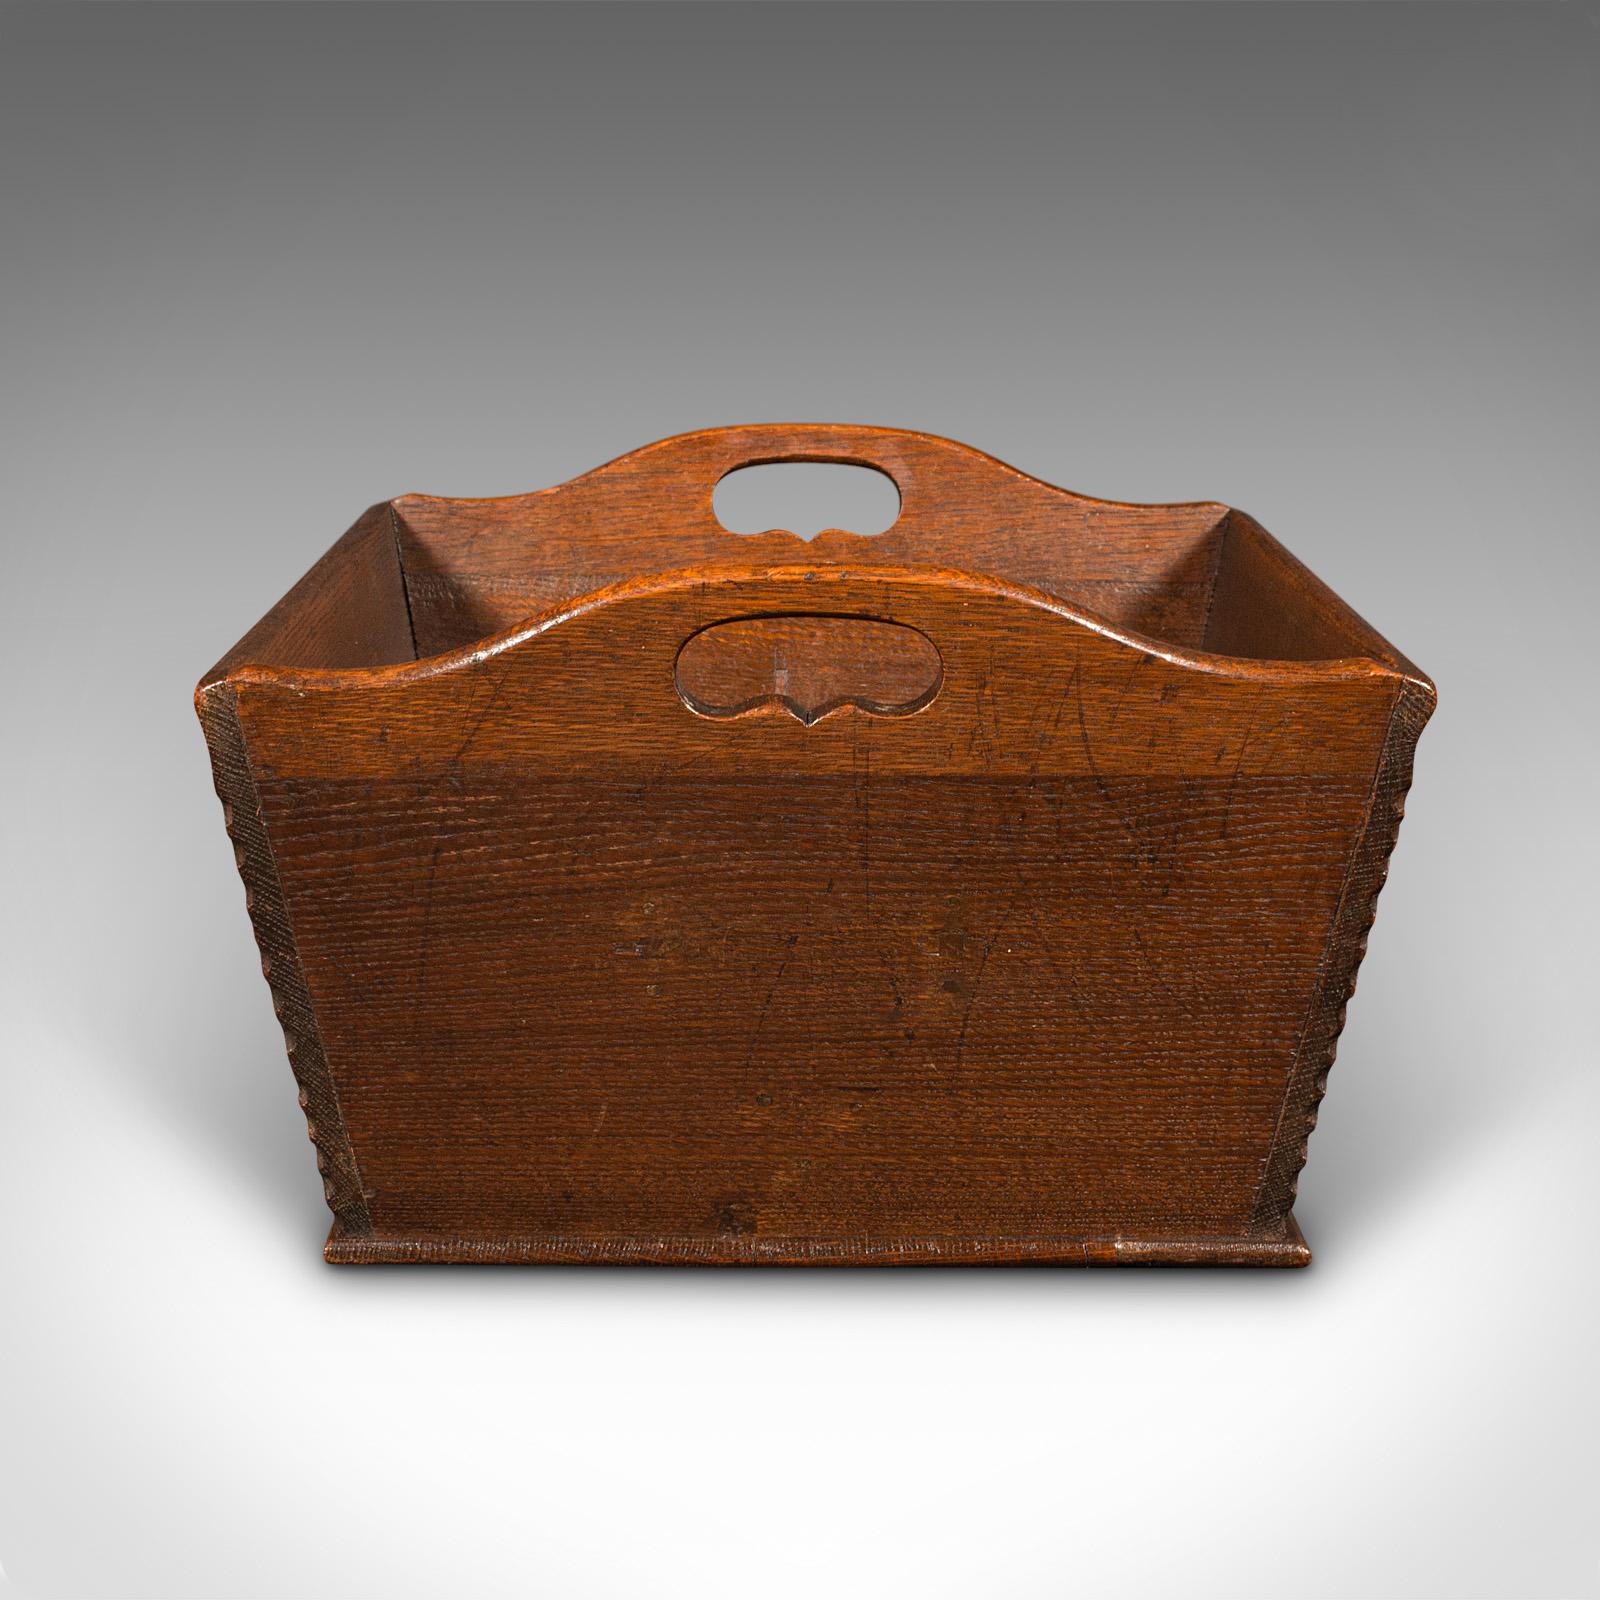 Antique Cheese Carrying Box, English, Oak, Garden Produce Tray, Georgian, c.1800 In Good Condition For Sale In Hele, Devon, GB